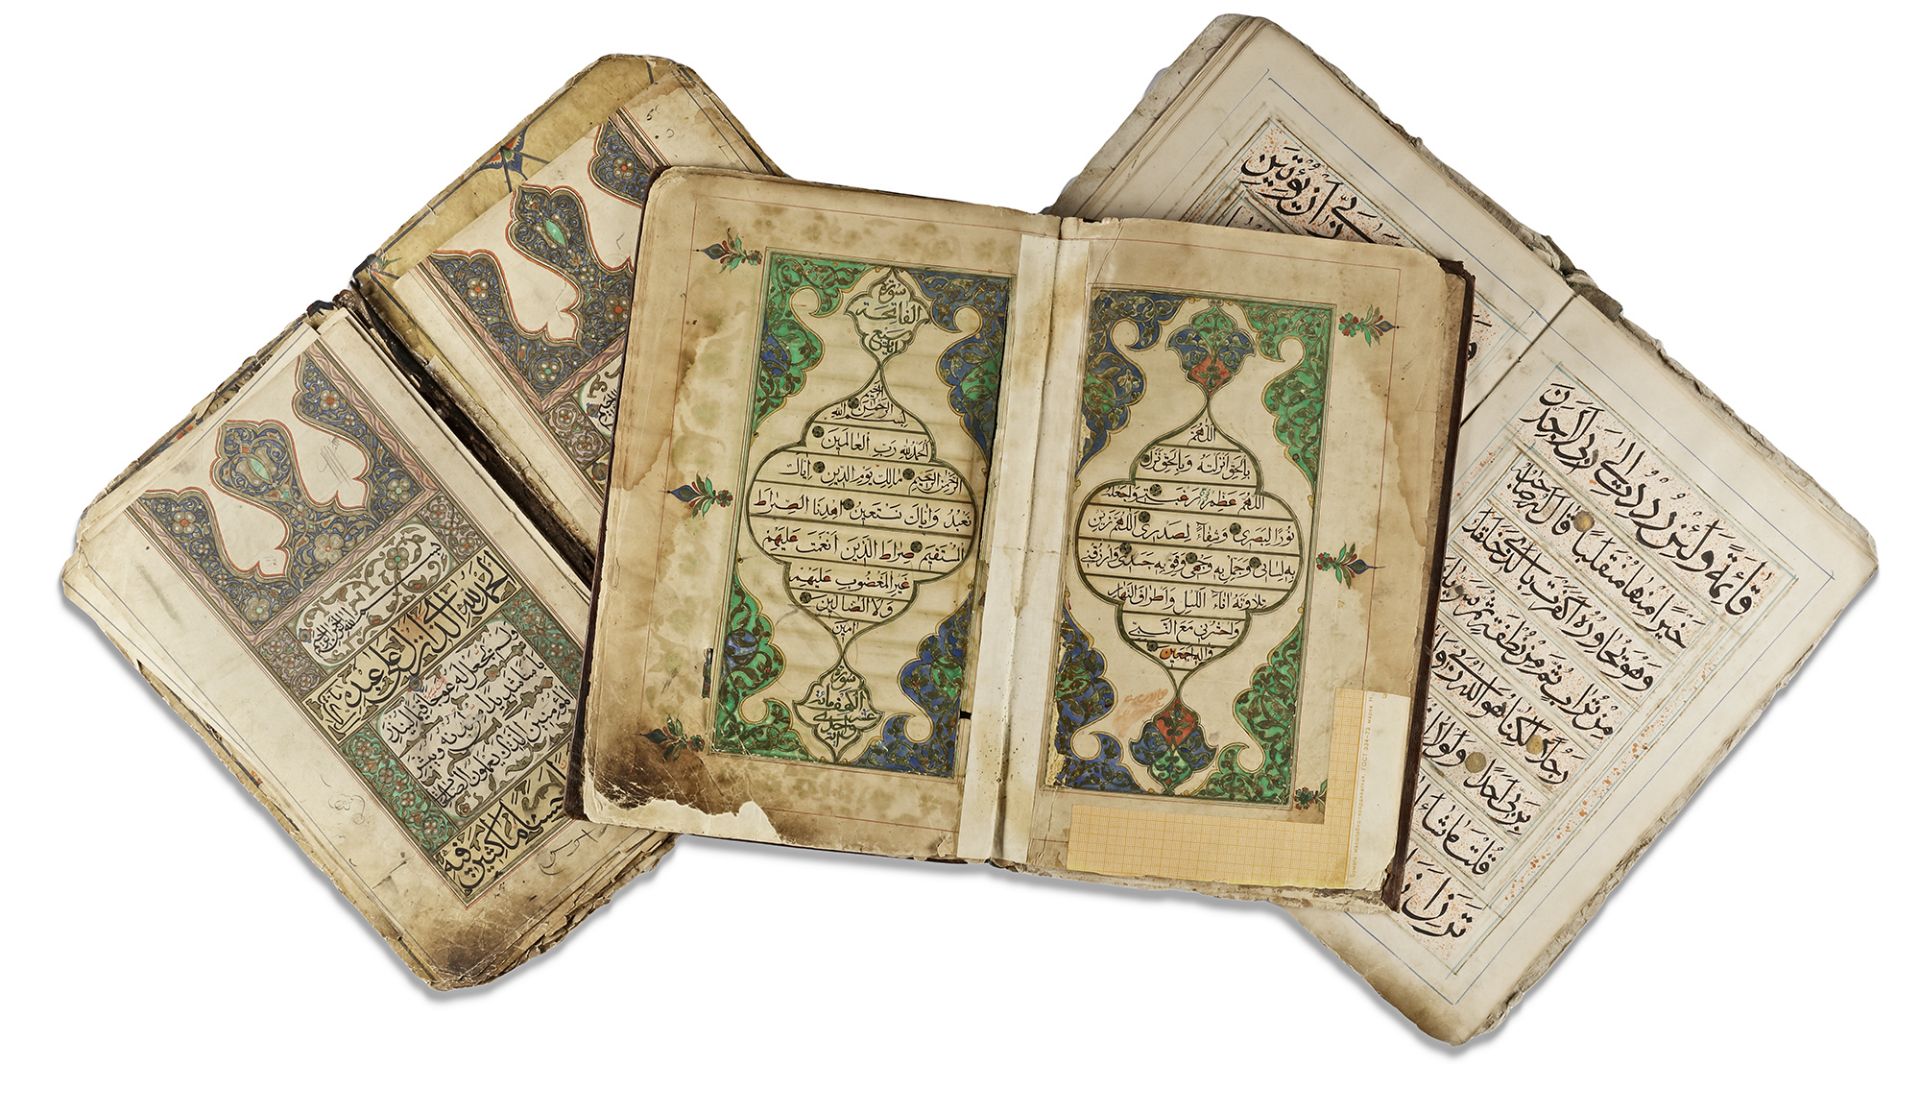 THREE QURAN SECTIONS, CENTRAL ASIA, LATE 19TH CENTURY